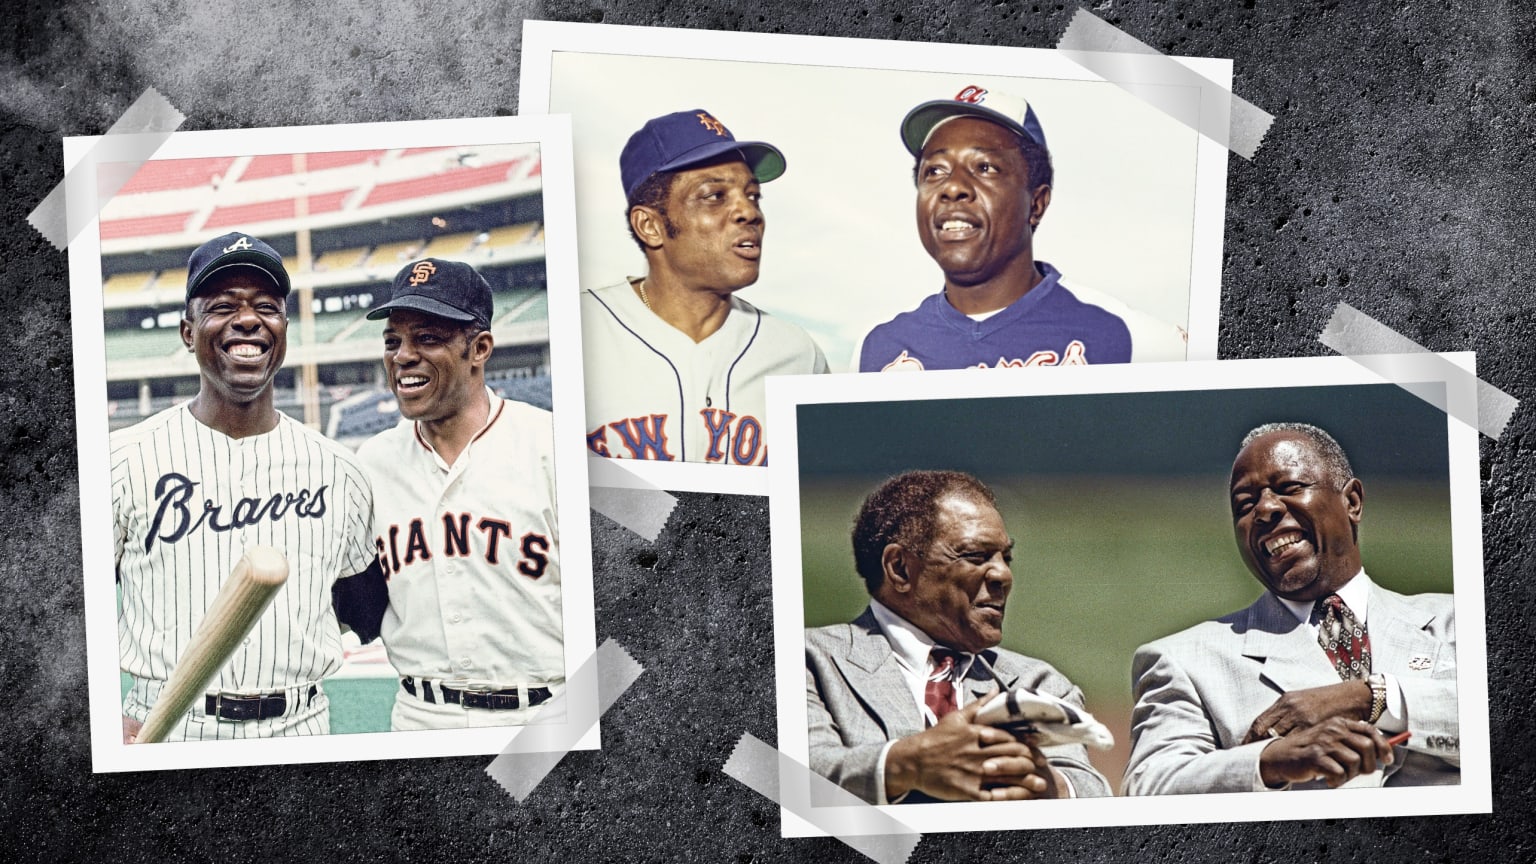 Photos of Willie Mays and Hank Aaron together